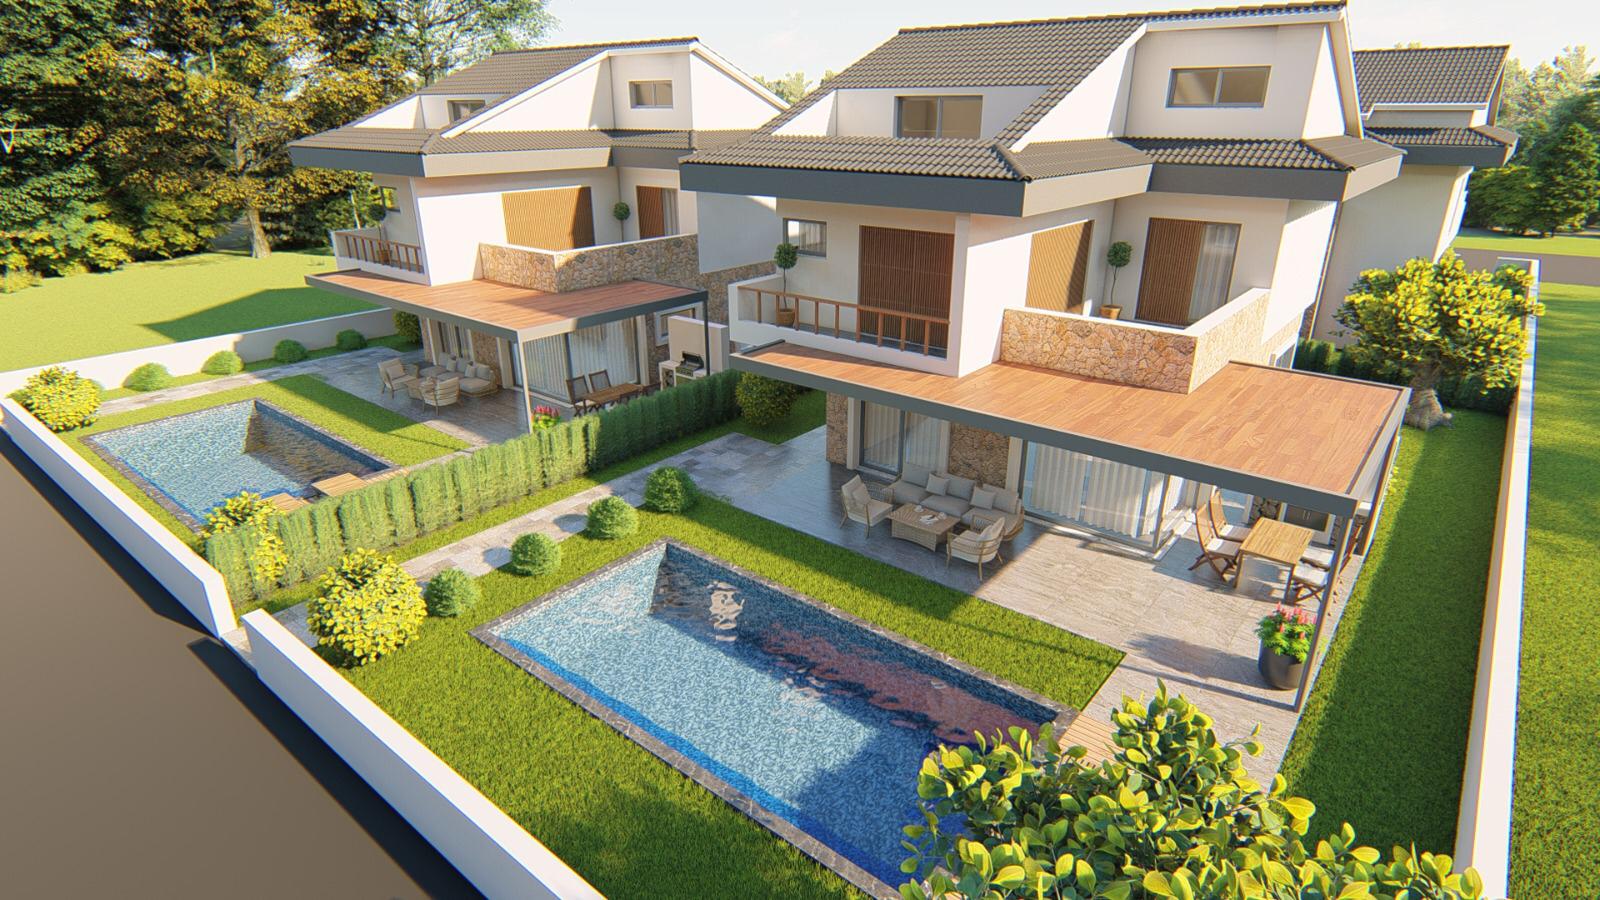 SOLD!!!Exclusive 5 Bedroom Calis Villas with Private Pool & Gardens